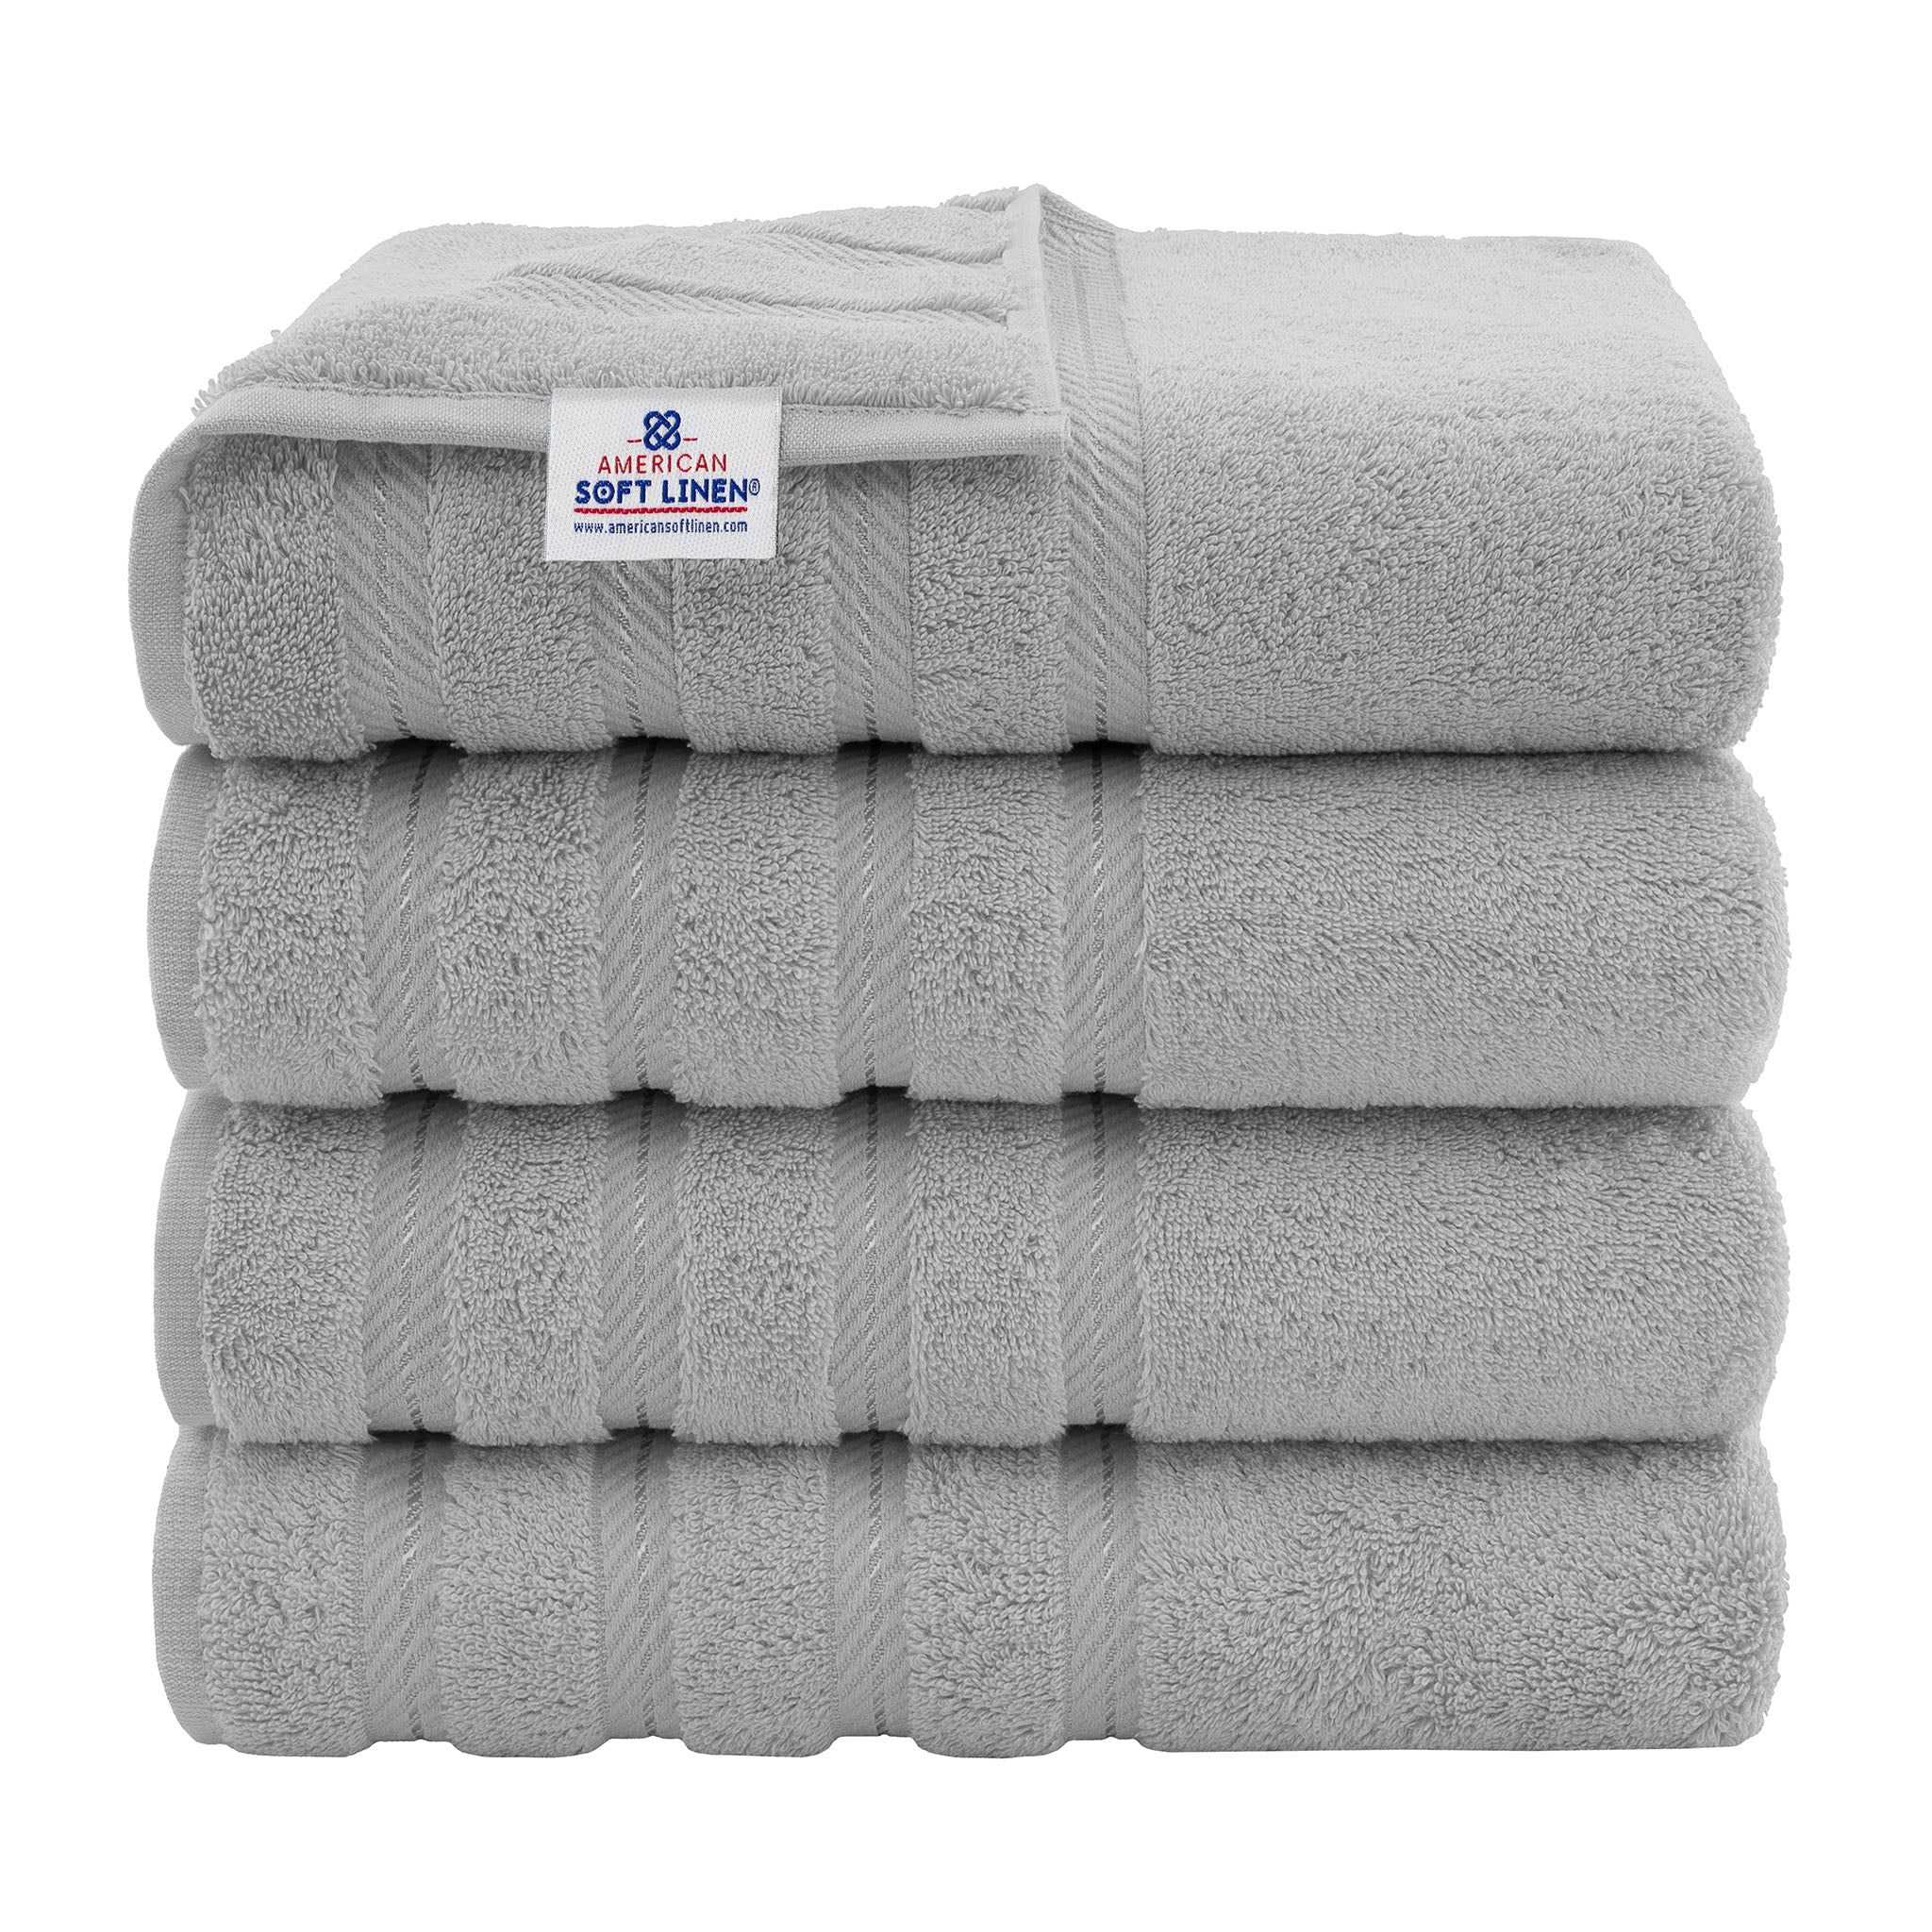 Extra Large Bath Towels Pack of 4 100% Cotton 27x54 Highly Absorbent Soft